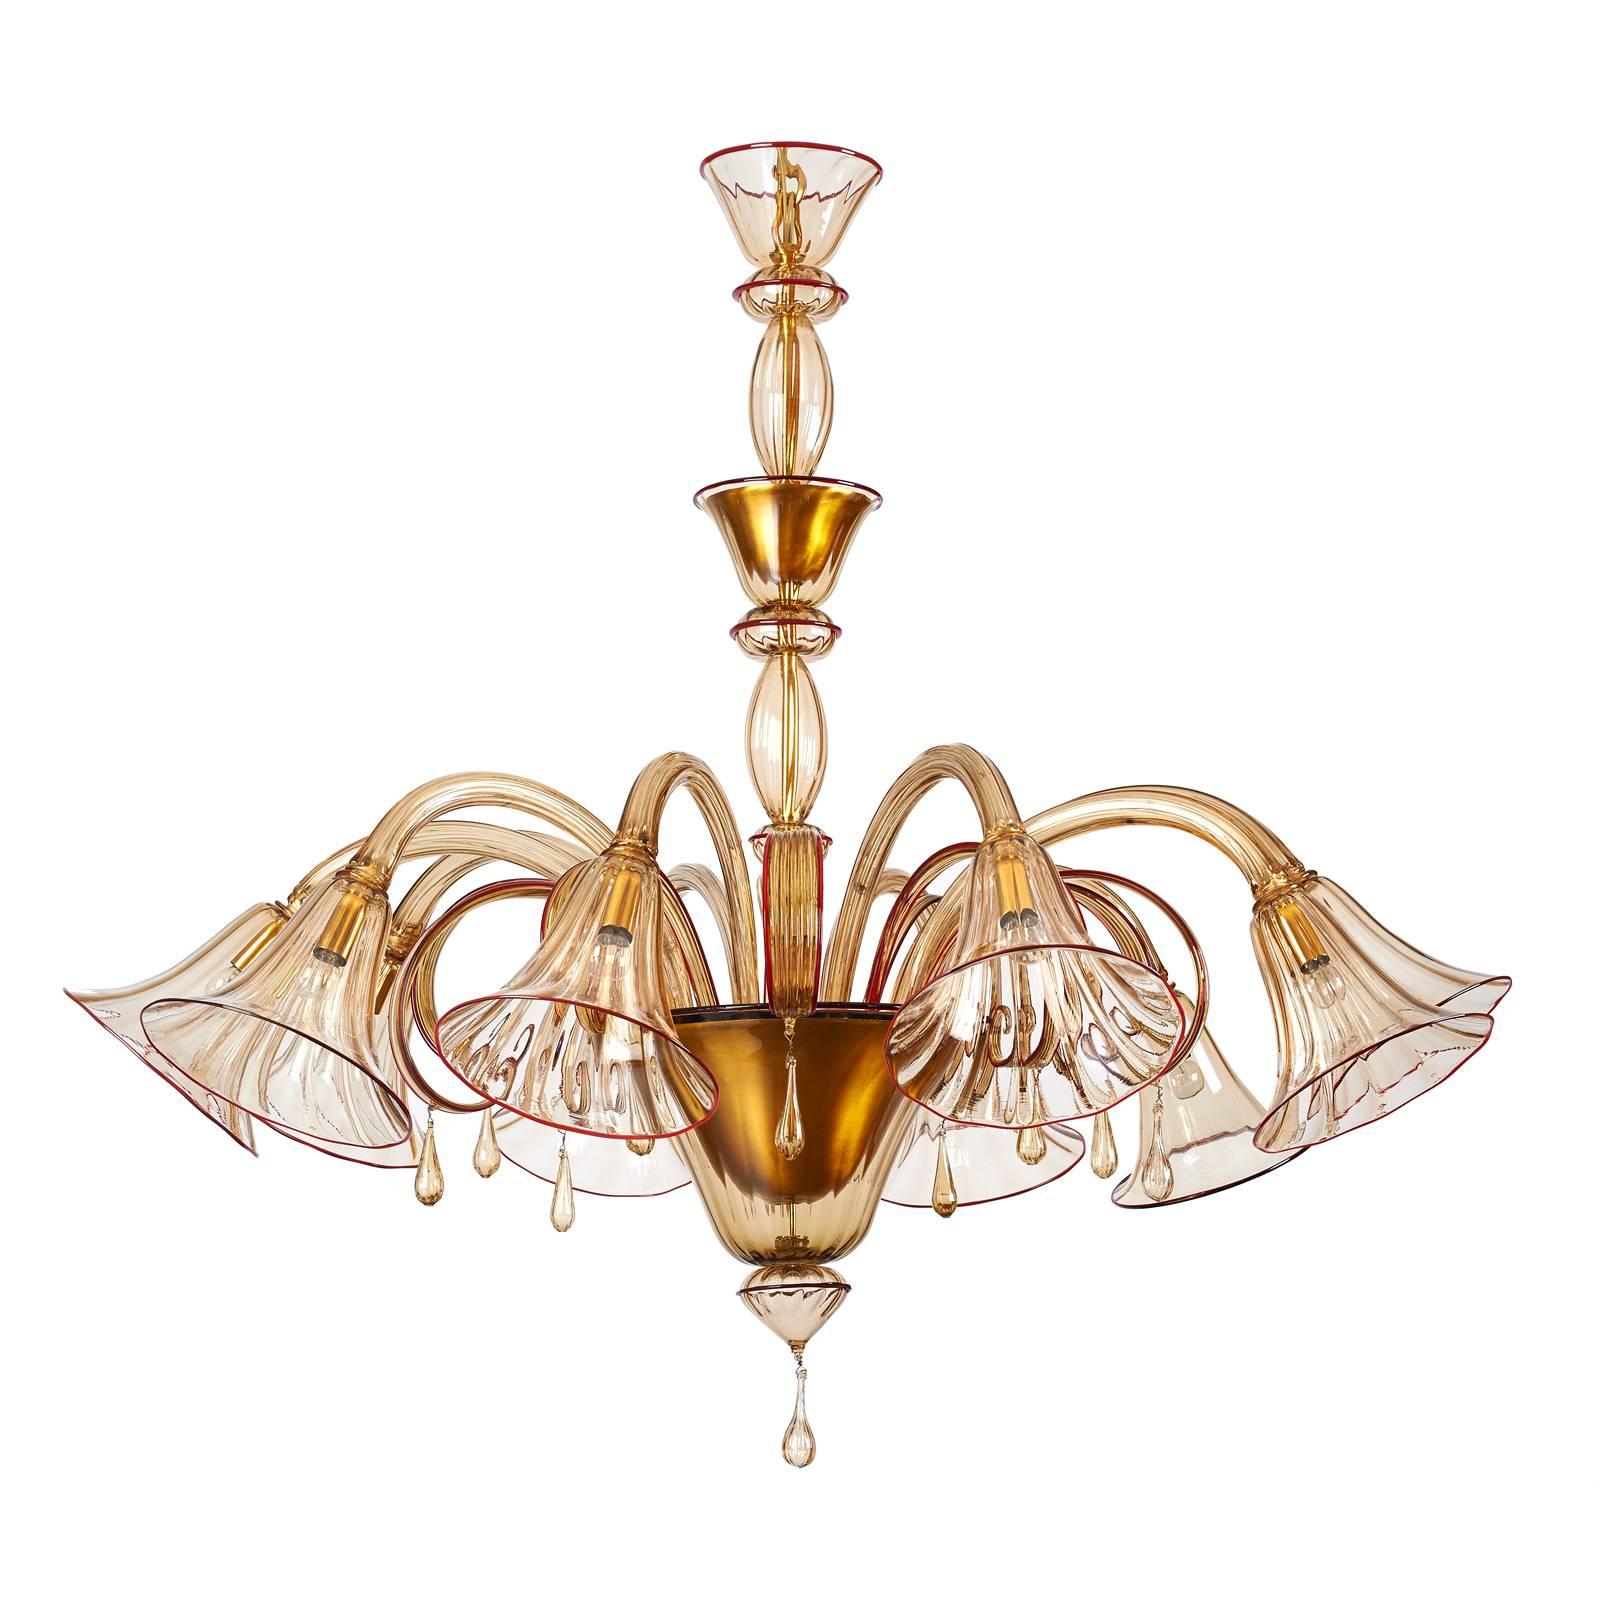 Mid-Century Modern Magnificent Murano Blown Glass Chandelier by Venini with Red Accent, 1920s For Sale